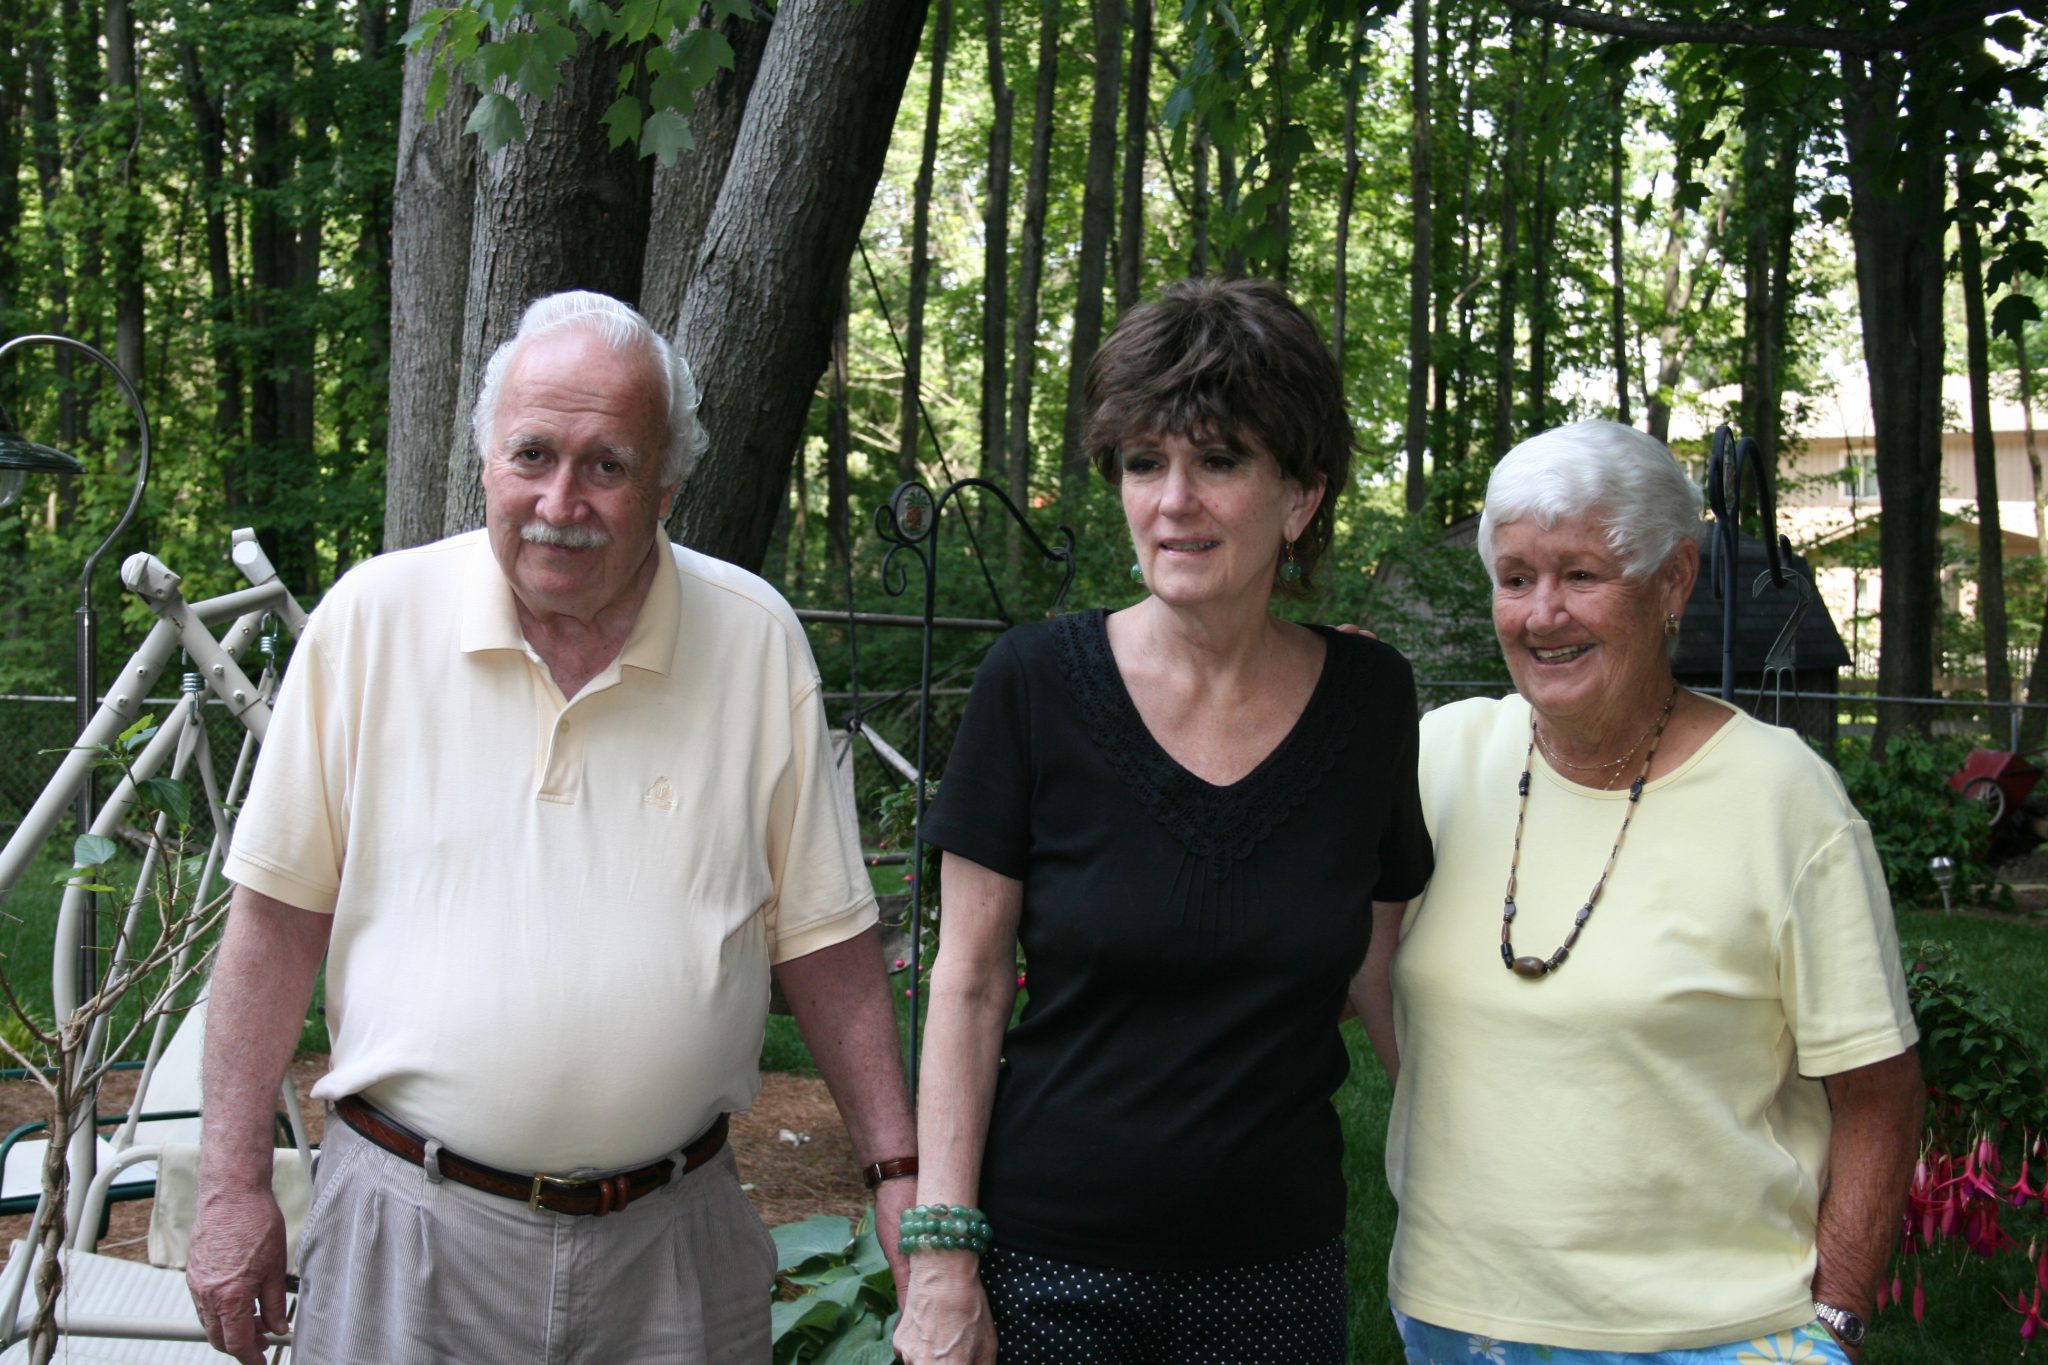 This is Aunt Pat with Uncle Bud (her brother) and my mom Carol (her sister) in 2008